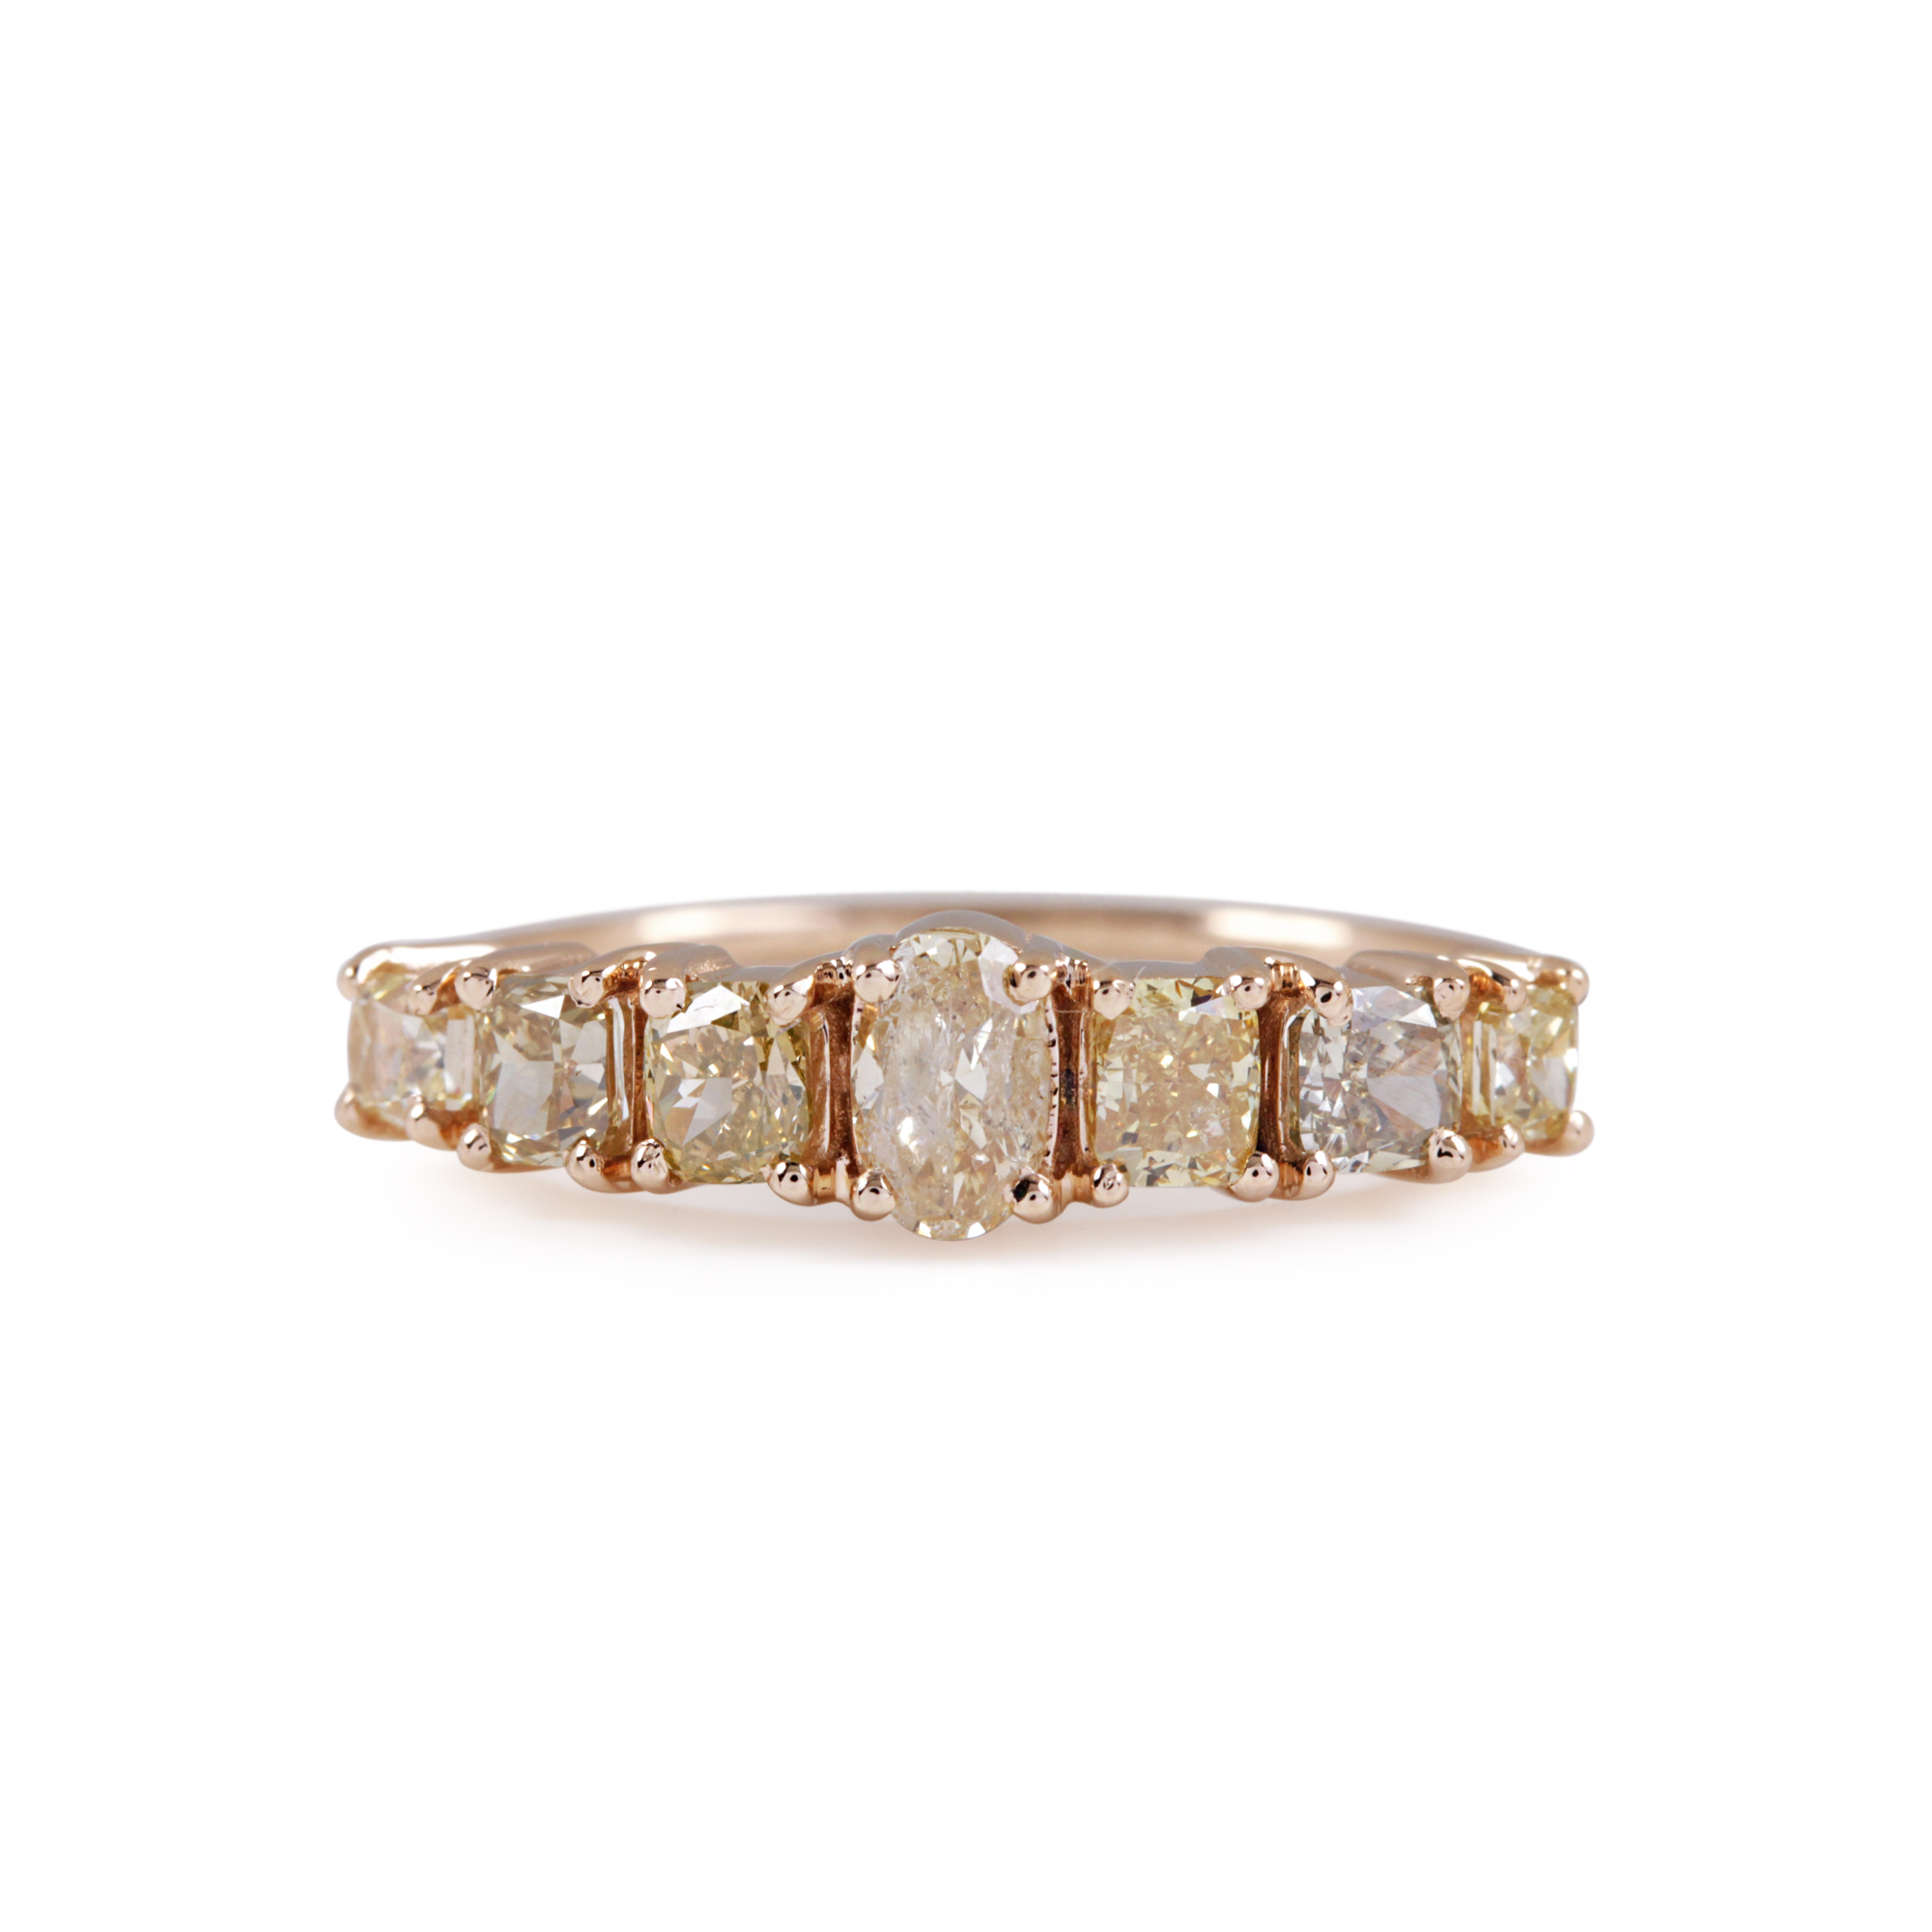 Natural Pave Diamond Ring 14K Solid Yellow Gold Jewelry